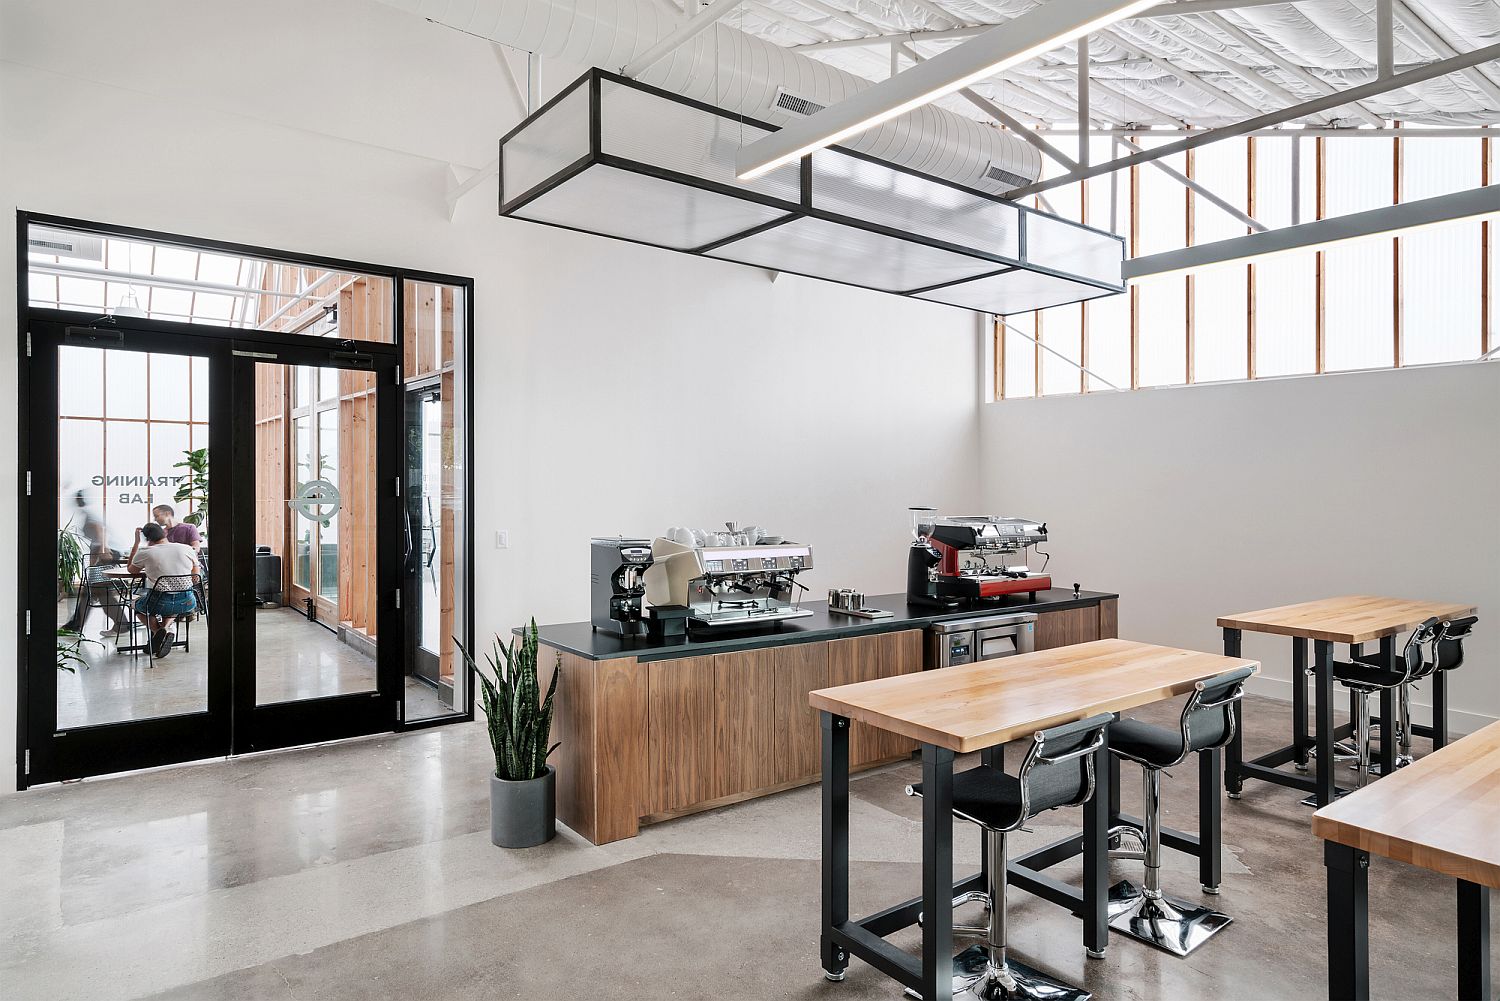 Look inside the modern cafe and roastery converted from old automobile building